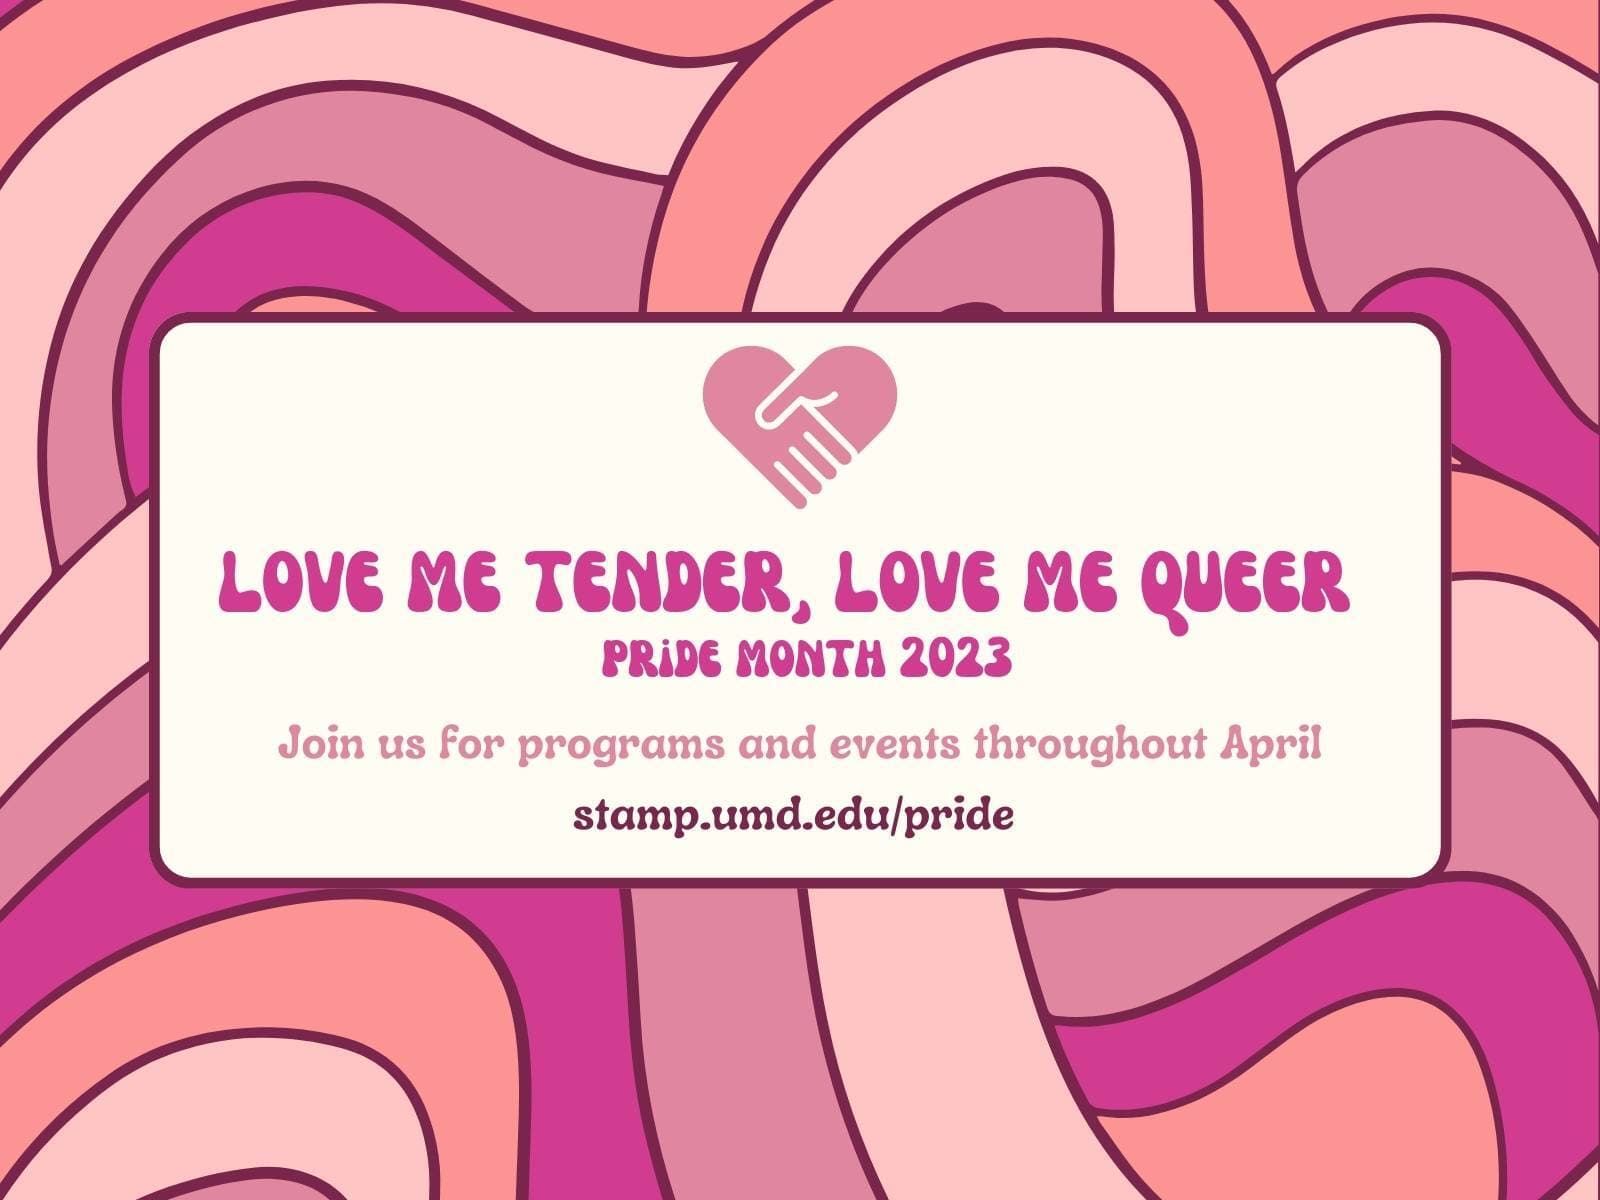 Graphic of abstract overlapping shapes in various shades of pink. There is a white box in the middle of the graphic with an icon of two clasped hands in the shape of a heart. Text reads "Love me Tender, Love me Queer. Pride Month 2023. Join us for programs and events throughout April. stamp.umd.edu/pride."